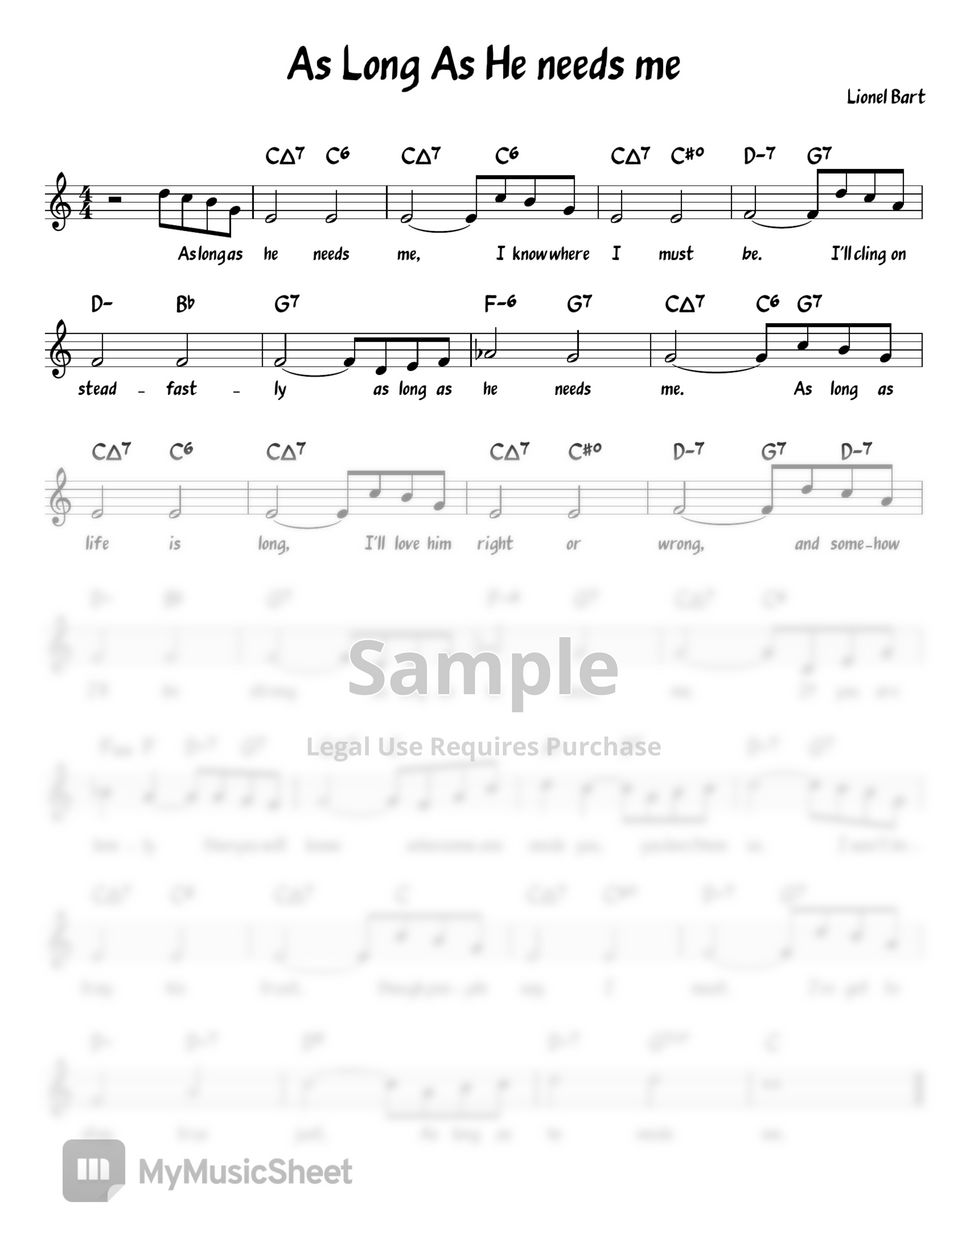 Lionel Bart - As Long as He Needs Me in C (Chord/Melody/Lyrics) (Lead Sheet) by ukulelewenwen